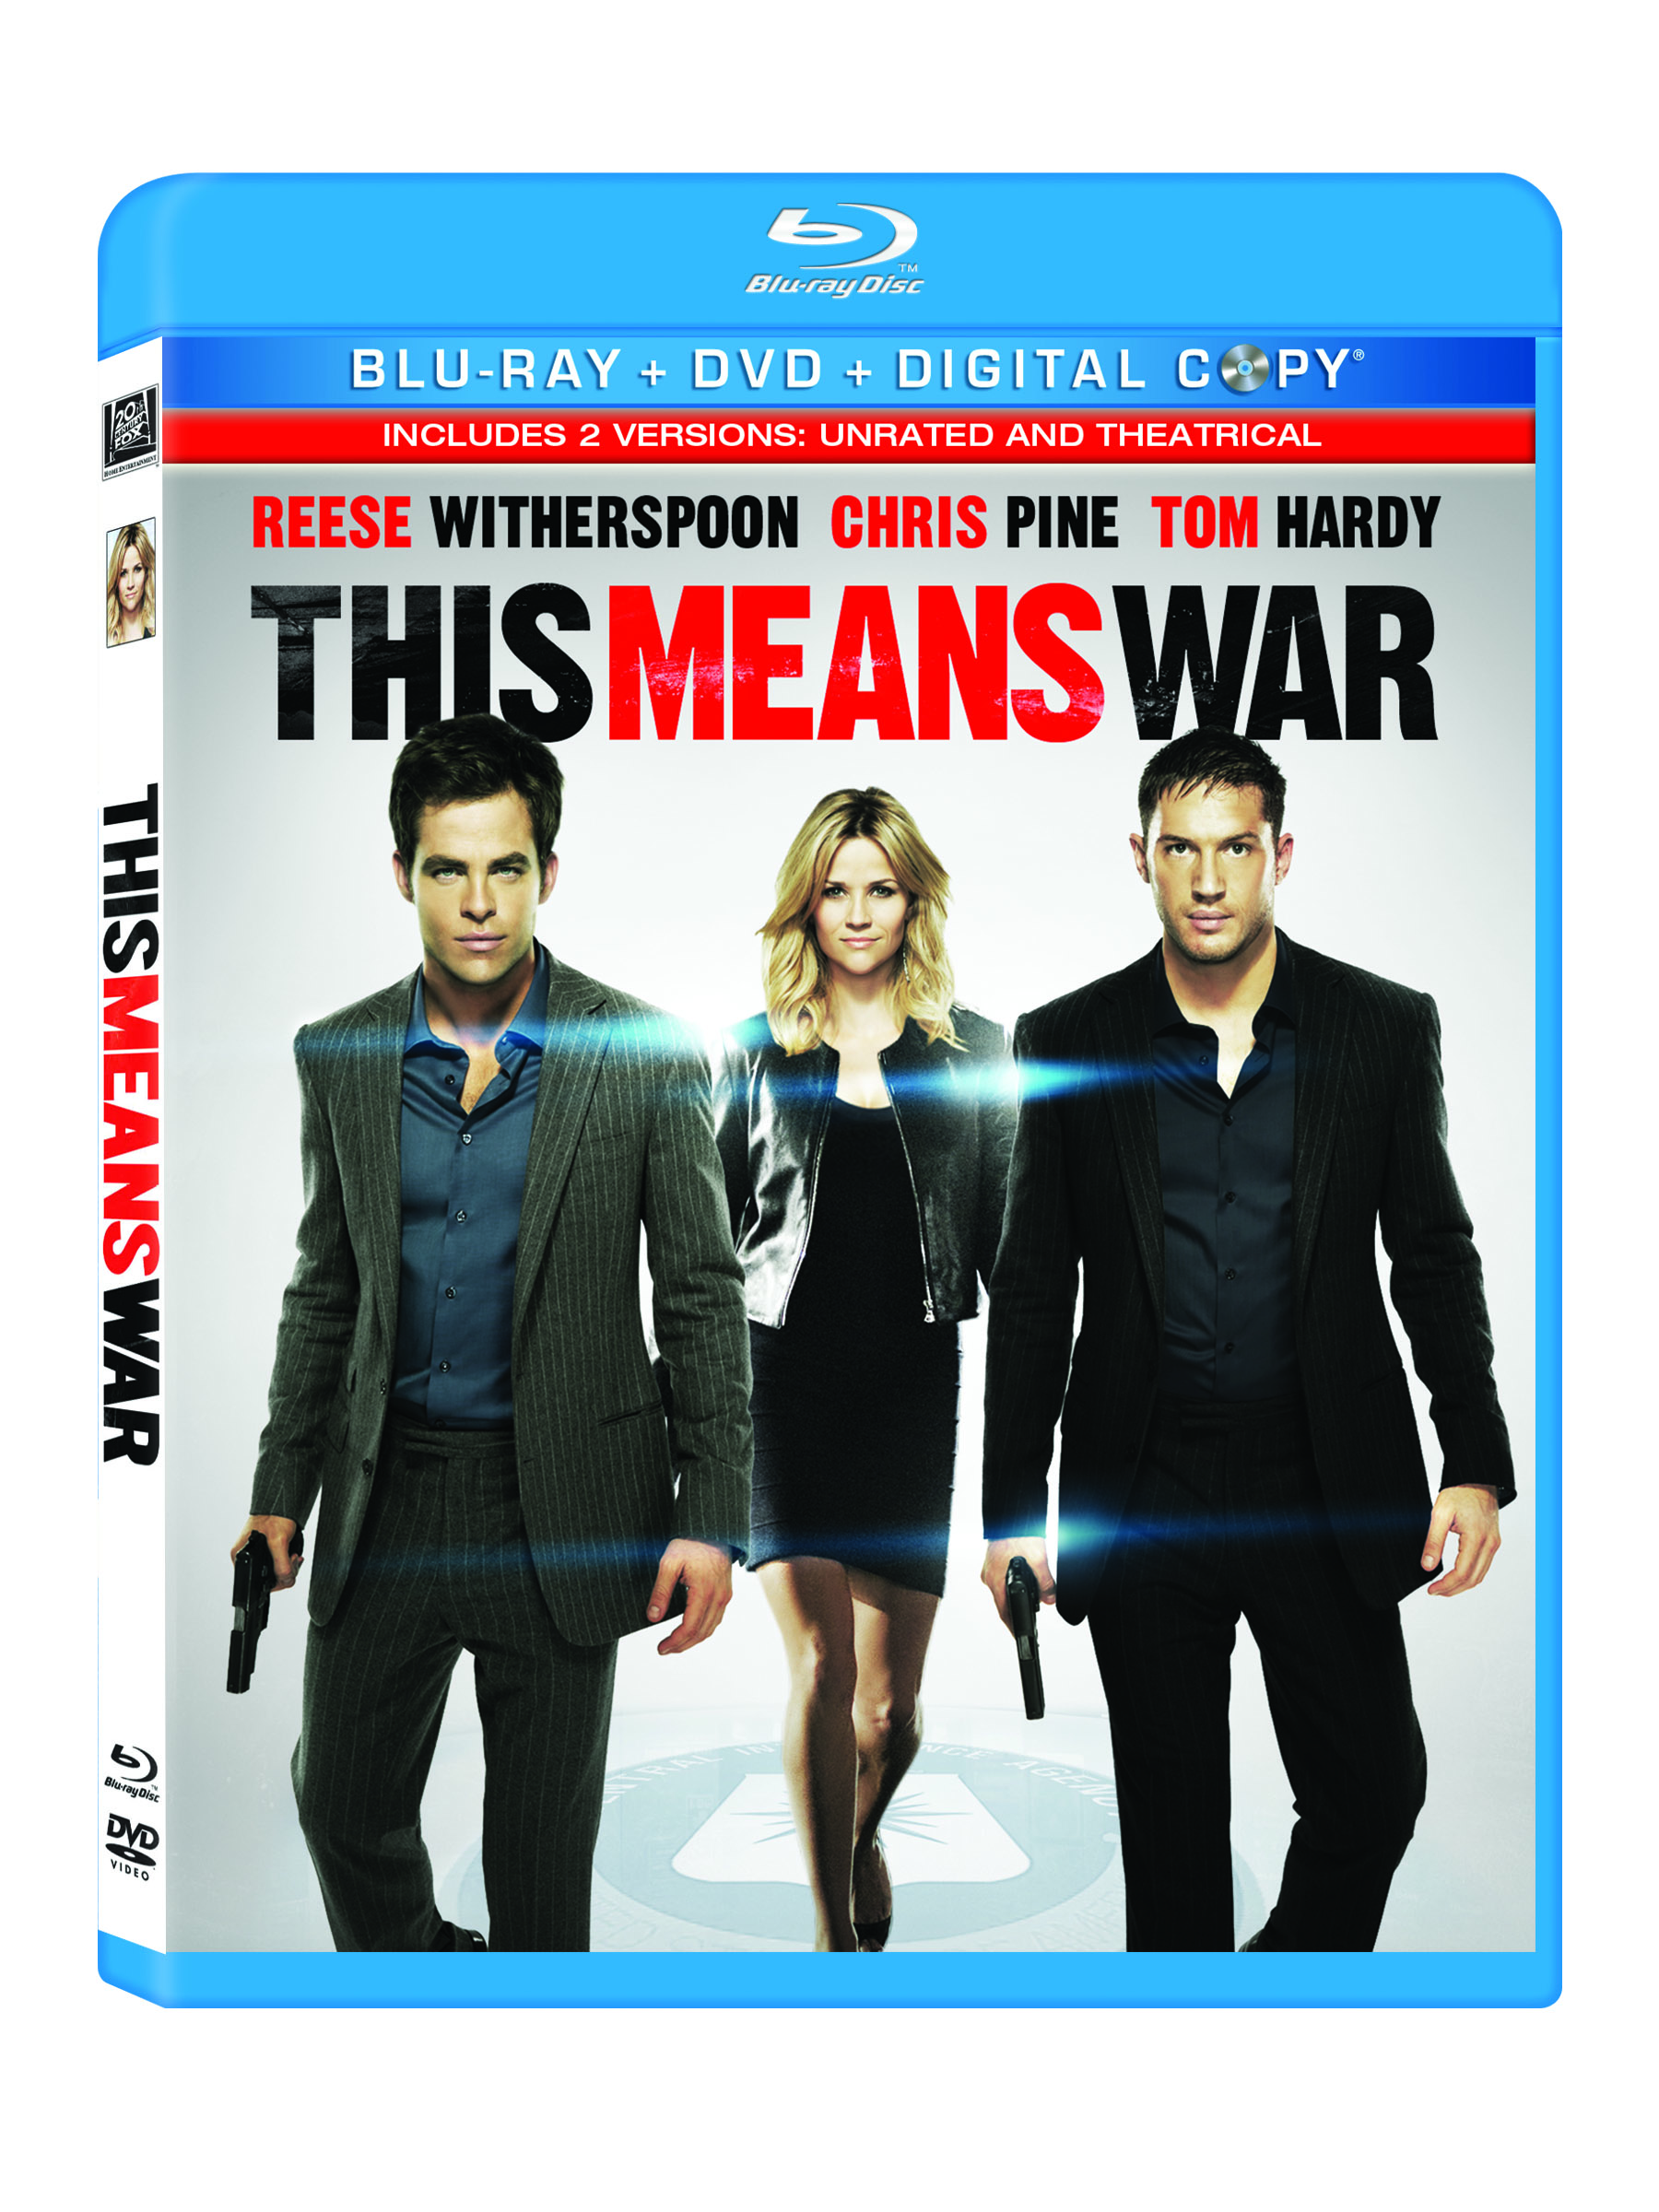 This Means War is Available on Blu-ray/DVD May 22nd